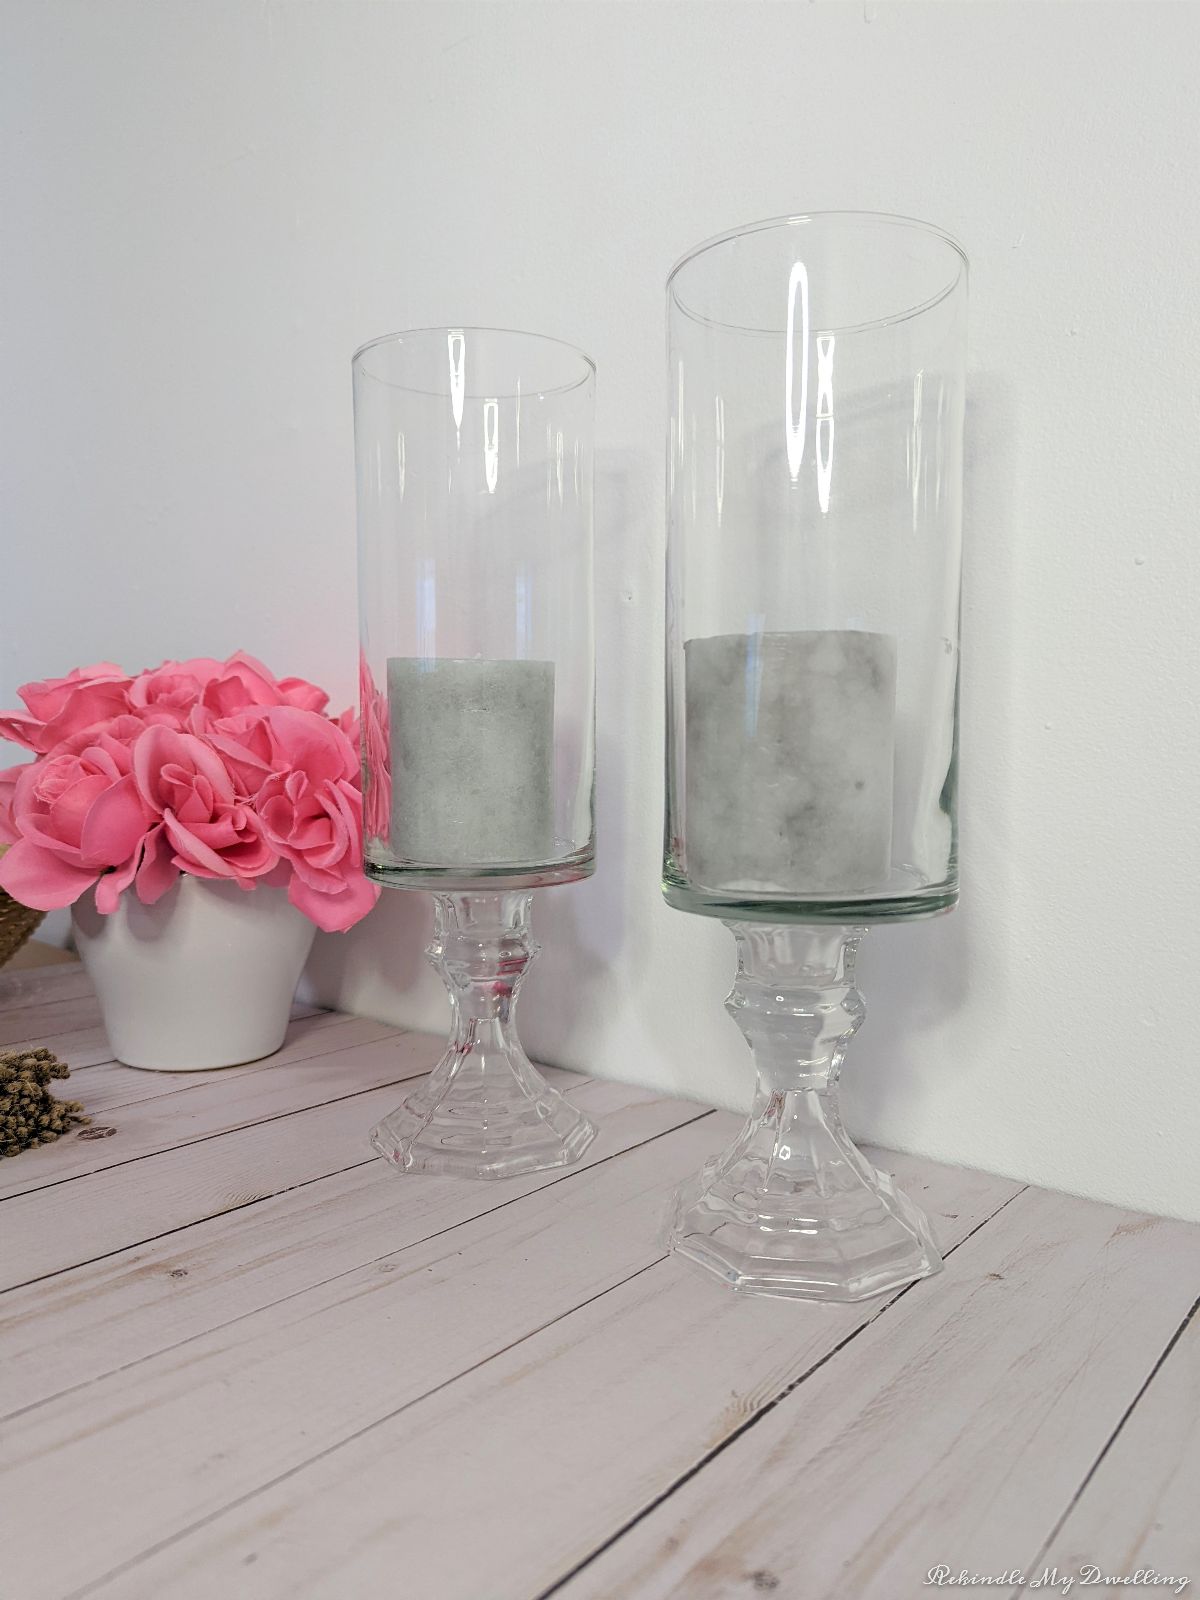 Pedestal vases with candles.